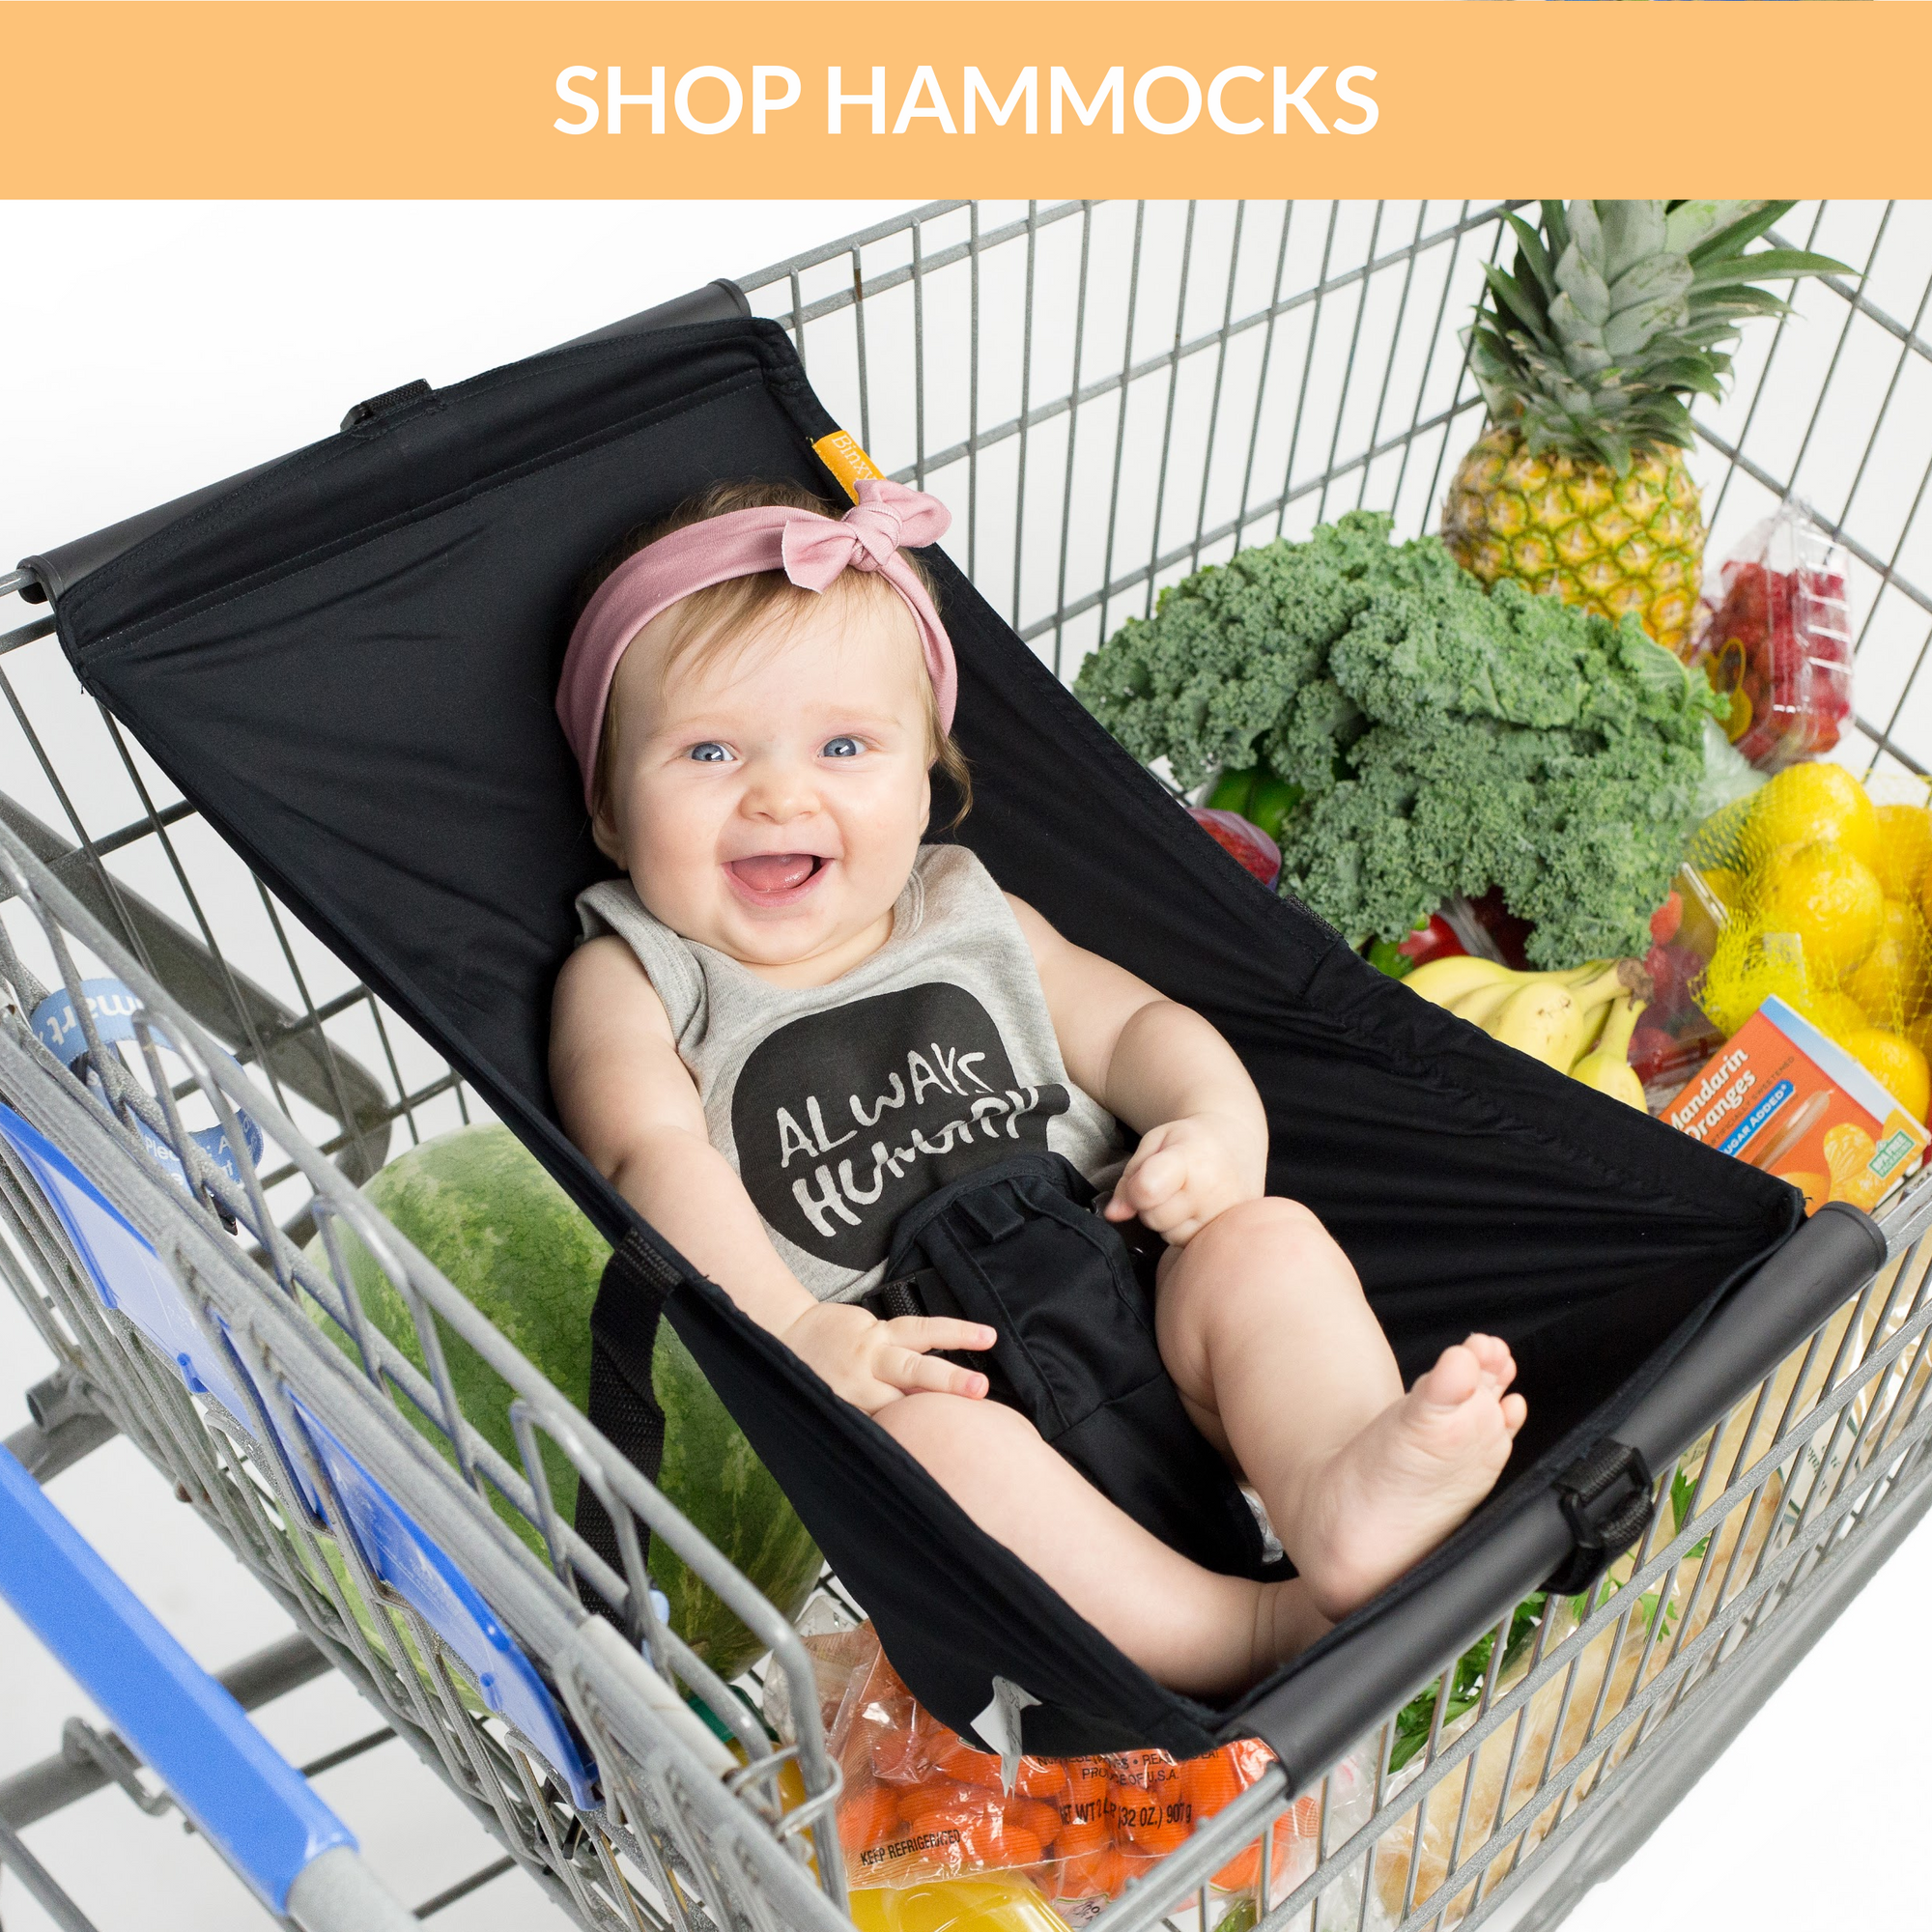 Binxy Baby Shopping Cart Hammock in black holds your baby in a comfy and secure sling while you shop. The hammock clips onto most shopping carts, hangs elevated to allow plenty of room for groceries underneath, then rolls up for easy transportation.